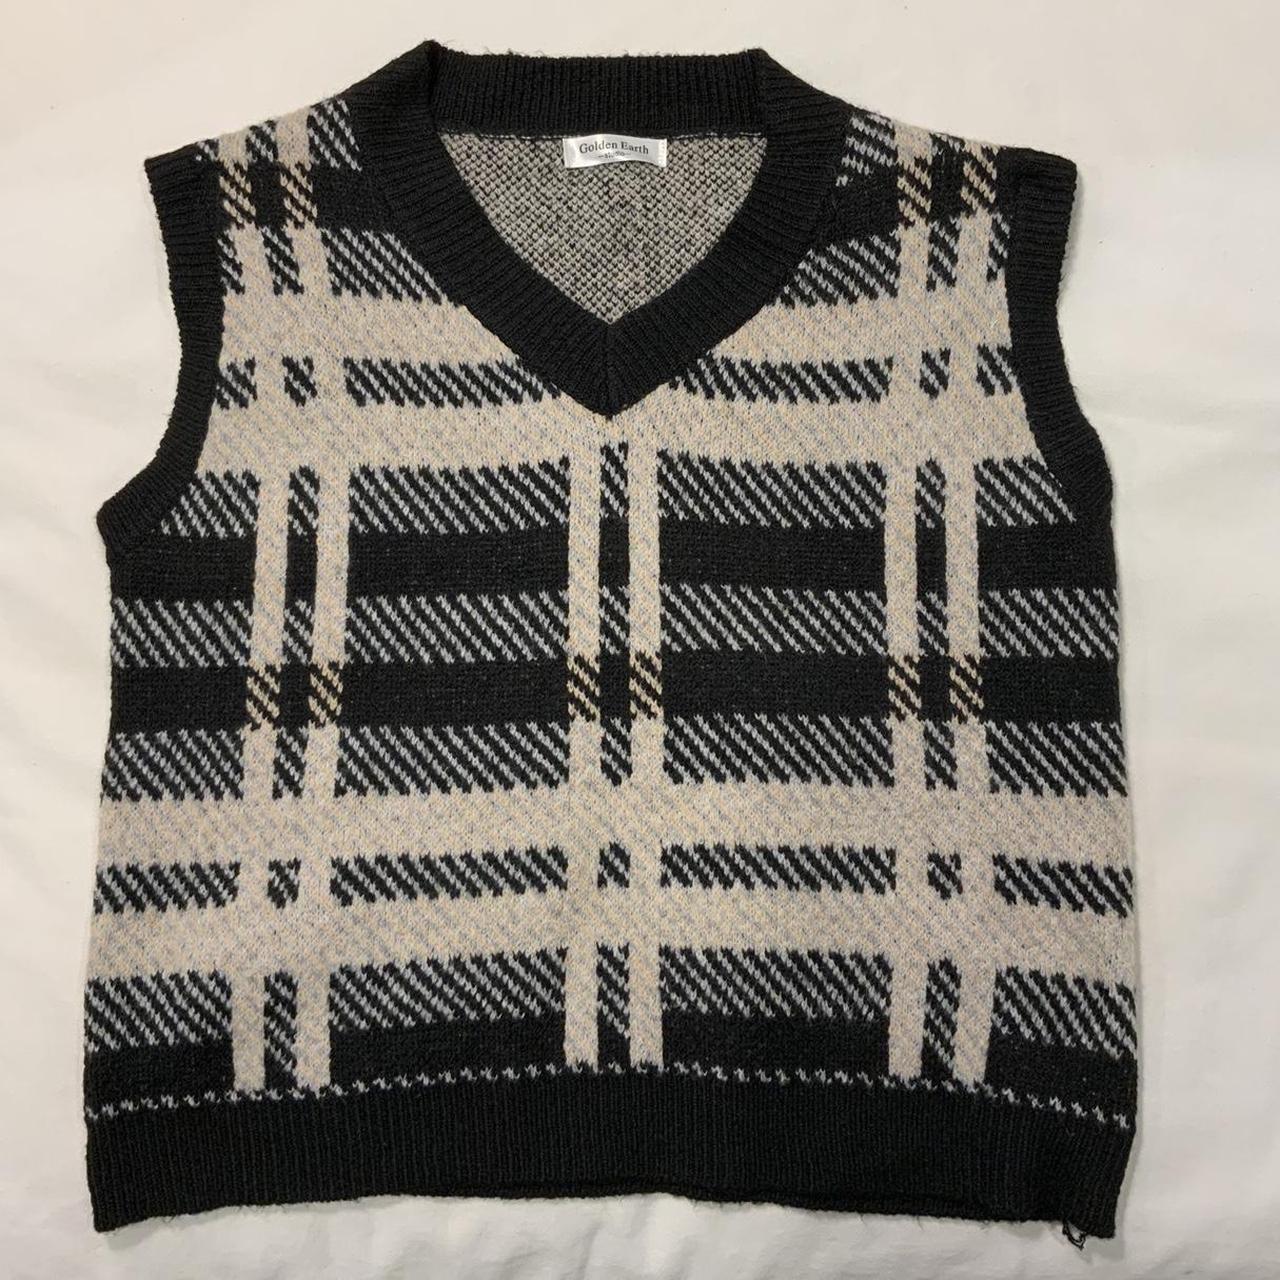 Plaid and Houndstooth Sweater Vest 𐐪𐑂 open to... - Depop